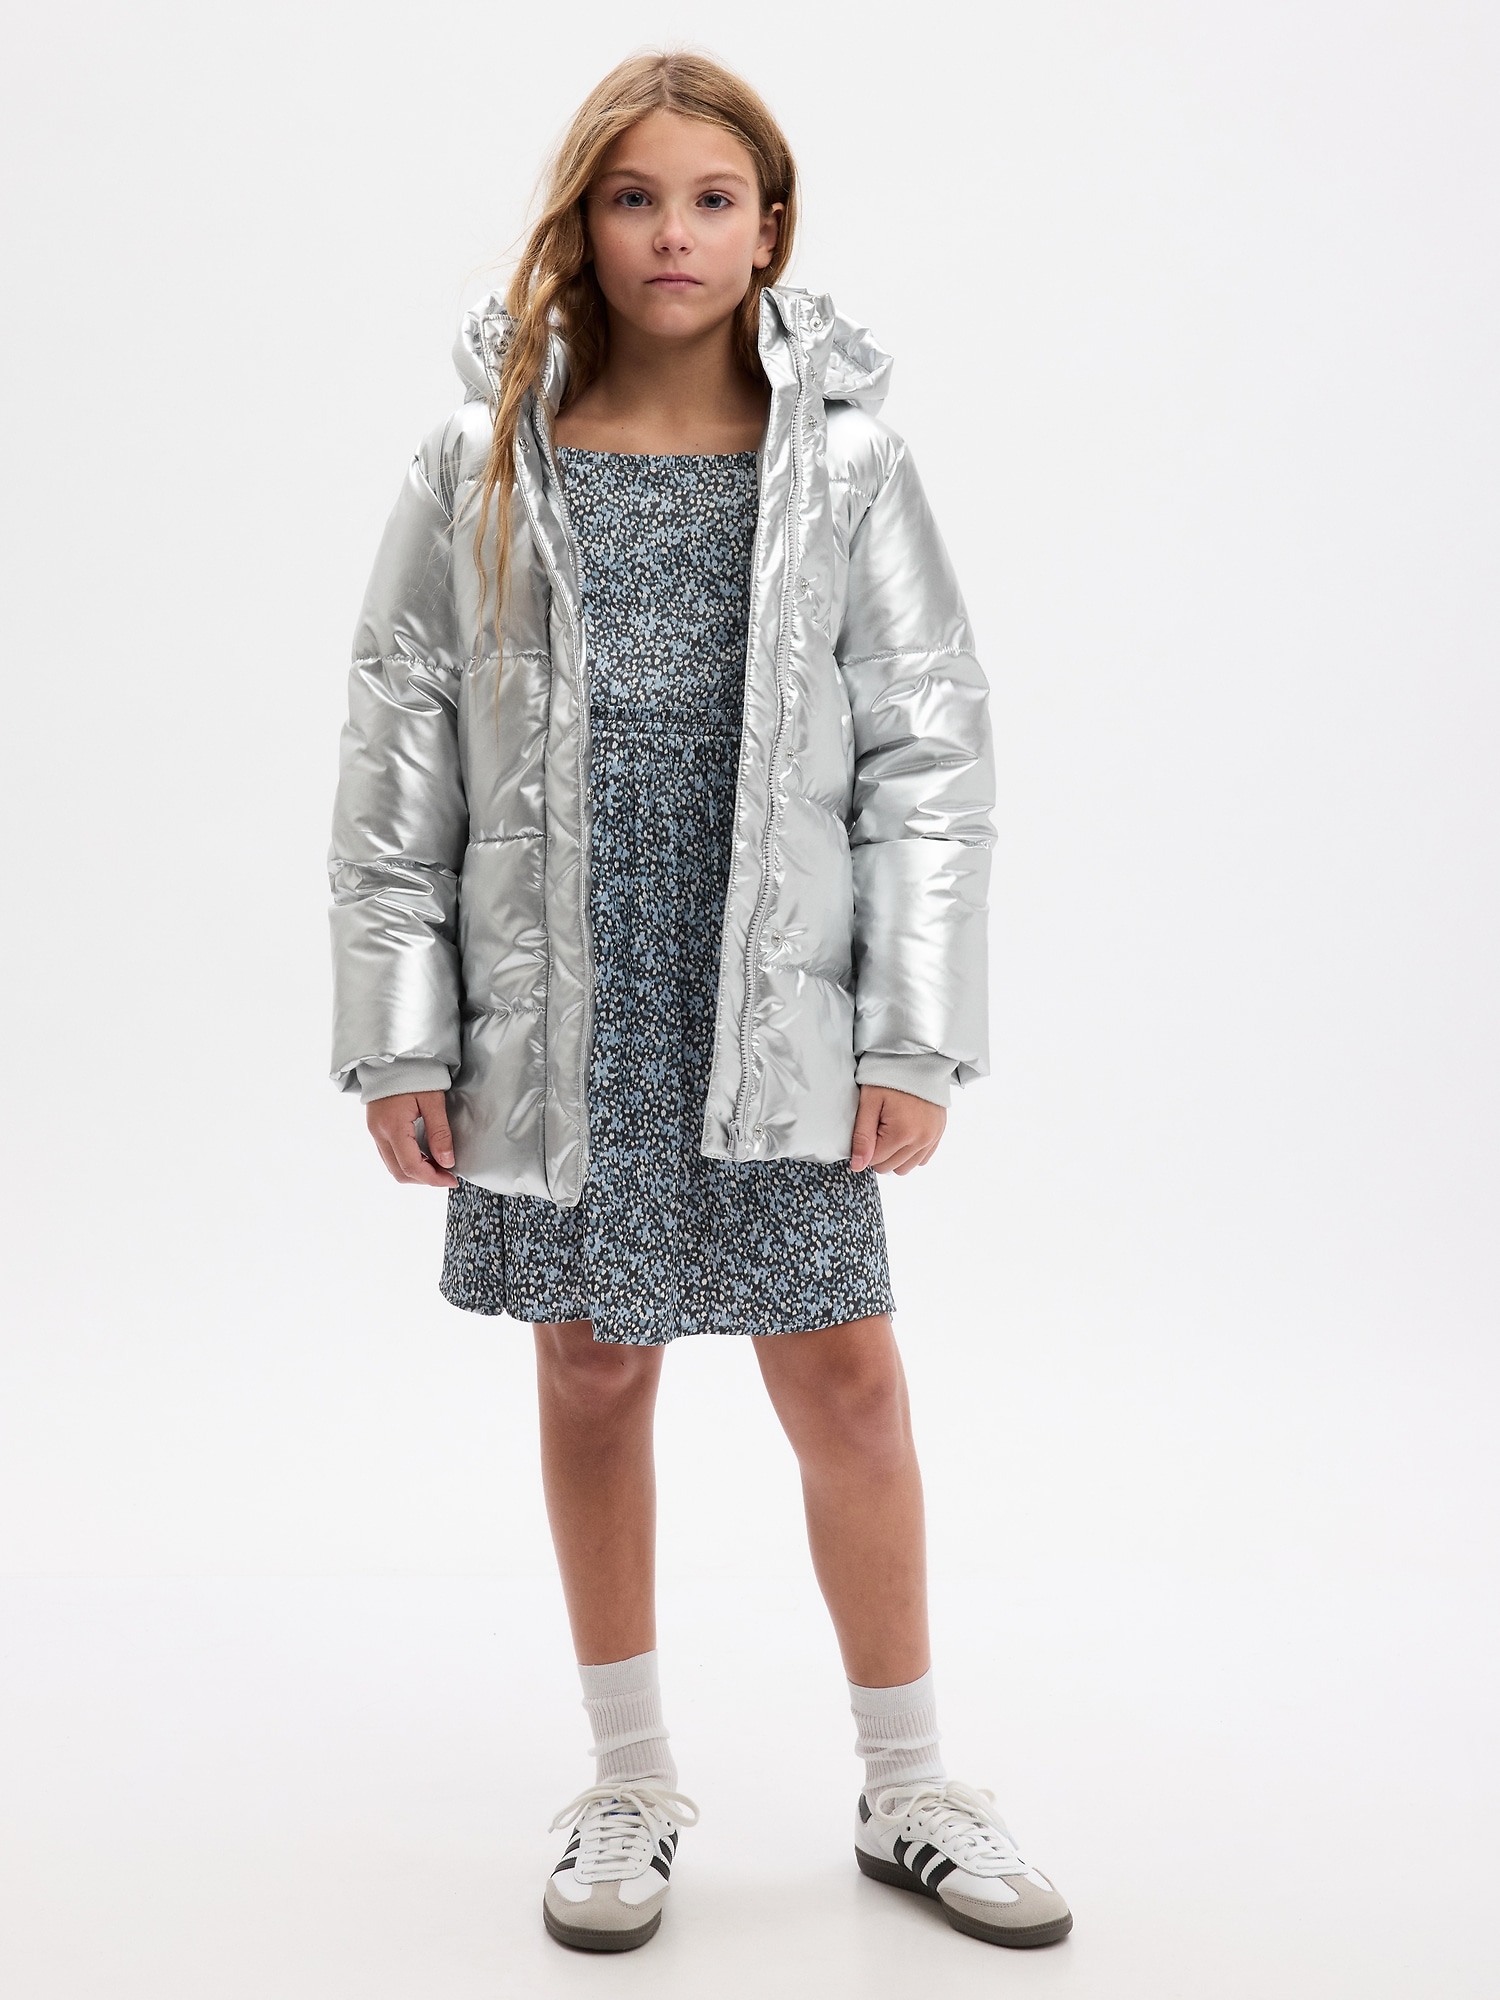 Girls' Recycled Heavyweight Puffer Jacket by Gap Silver Metallic Size S (6/7)